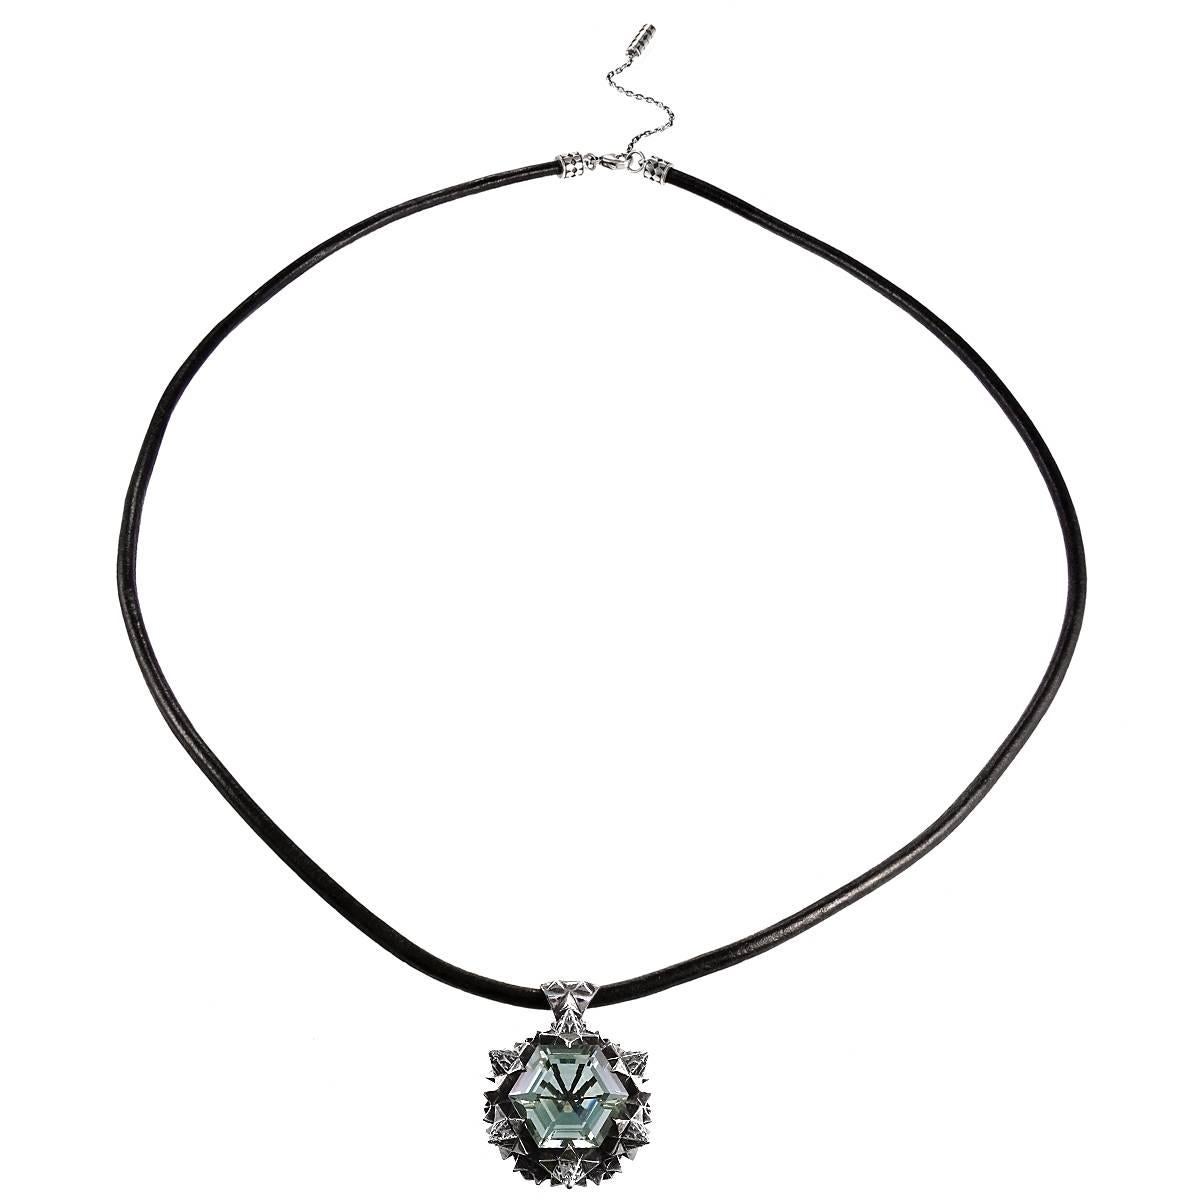 This unique Thoscene Green Amethyst Silver Joy Pendant Necklace features a green amethyst stone set in sterling silver and was designed to evoke joy in one's life. All of the pieces, including this pendant necklace, in John Brevard’s Thoscene